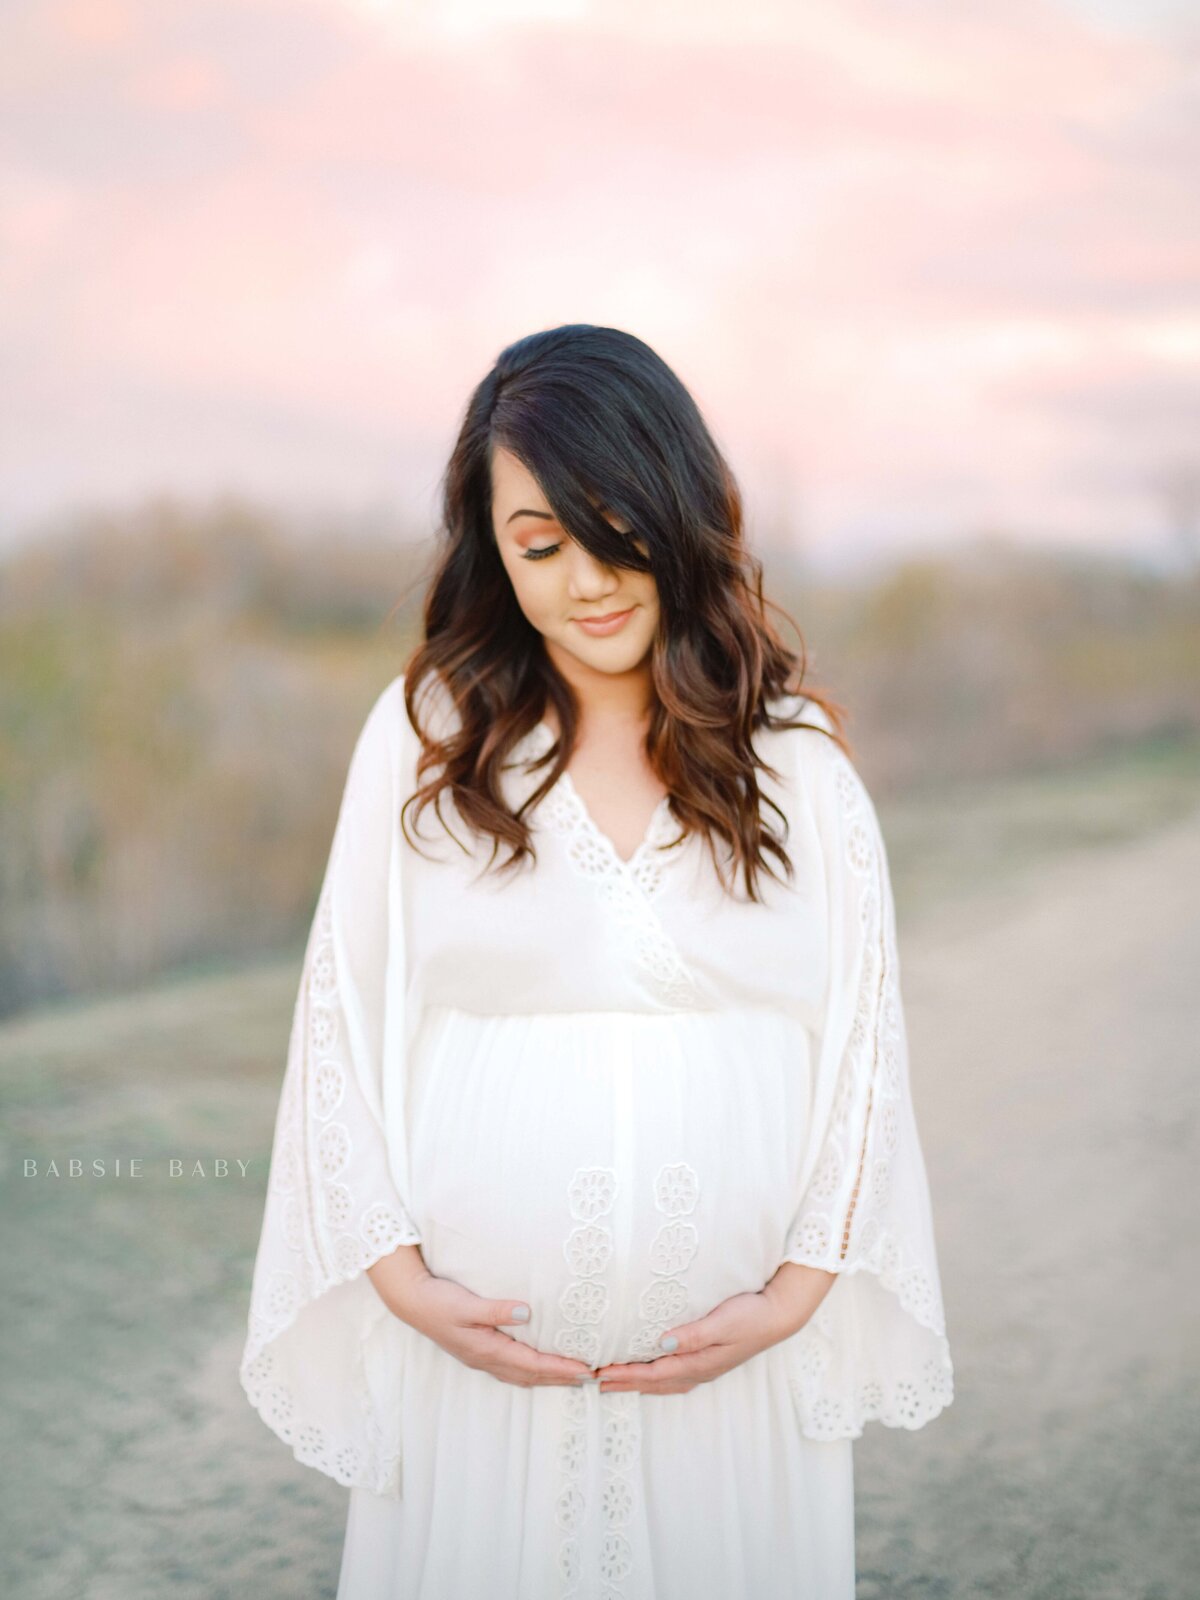 Maternity-Photographer-in-San-Diego-Babsie-Baby-Photography-Joanna-01